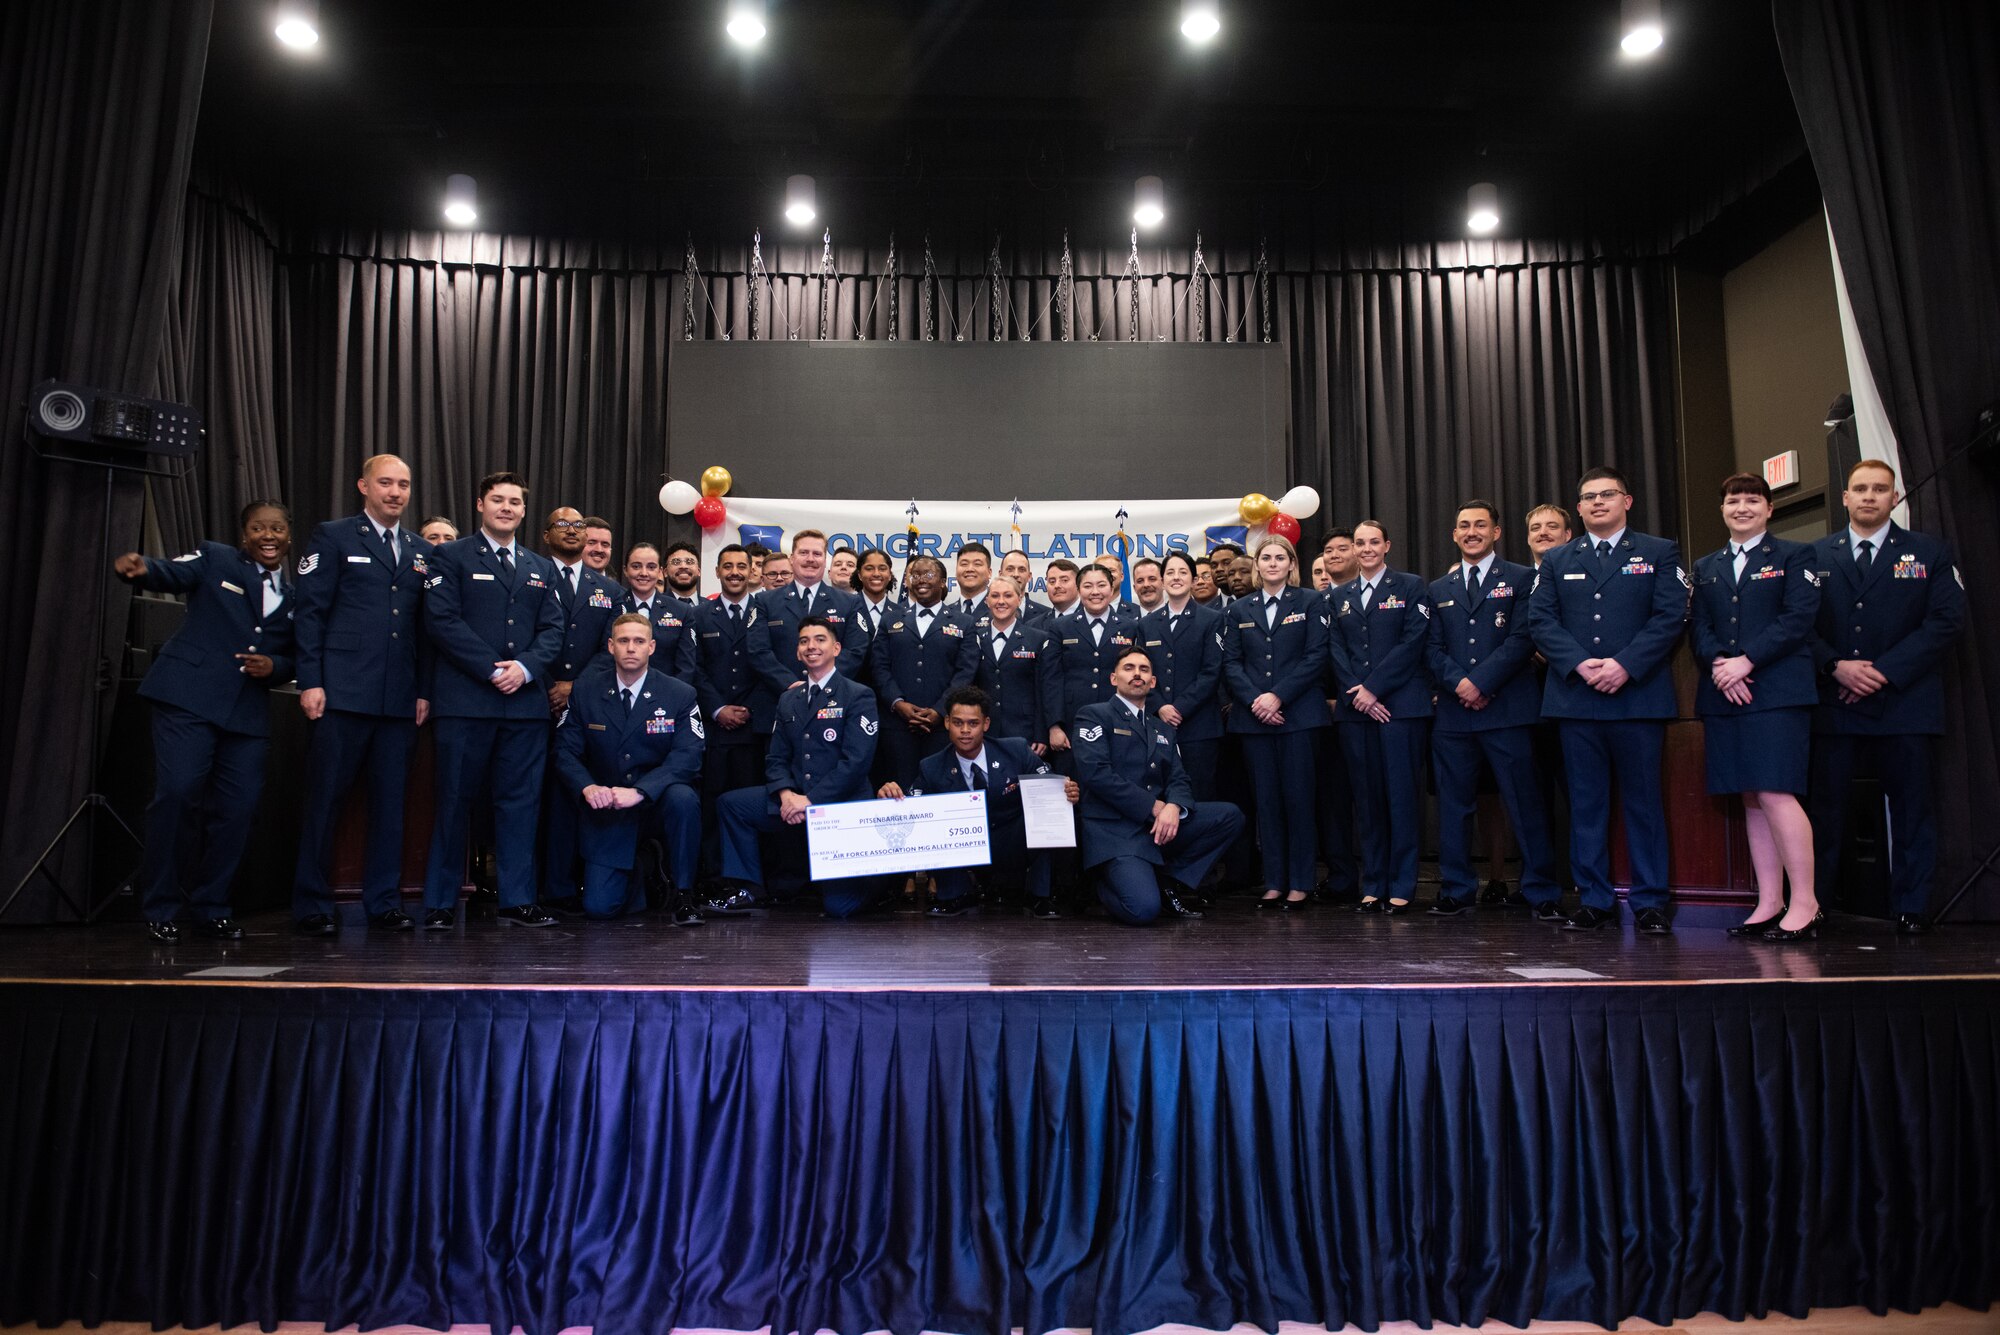 U.S. Air Force Airmen pose for a group photo after a Community College of the Air Force graduation ceremony at Osan Air Base, Republic of Korea, Nov. 15, 2022.